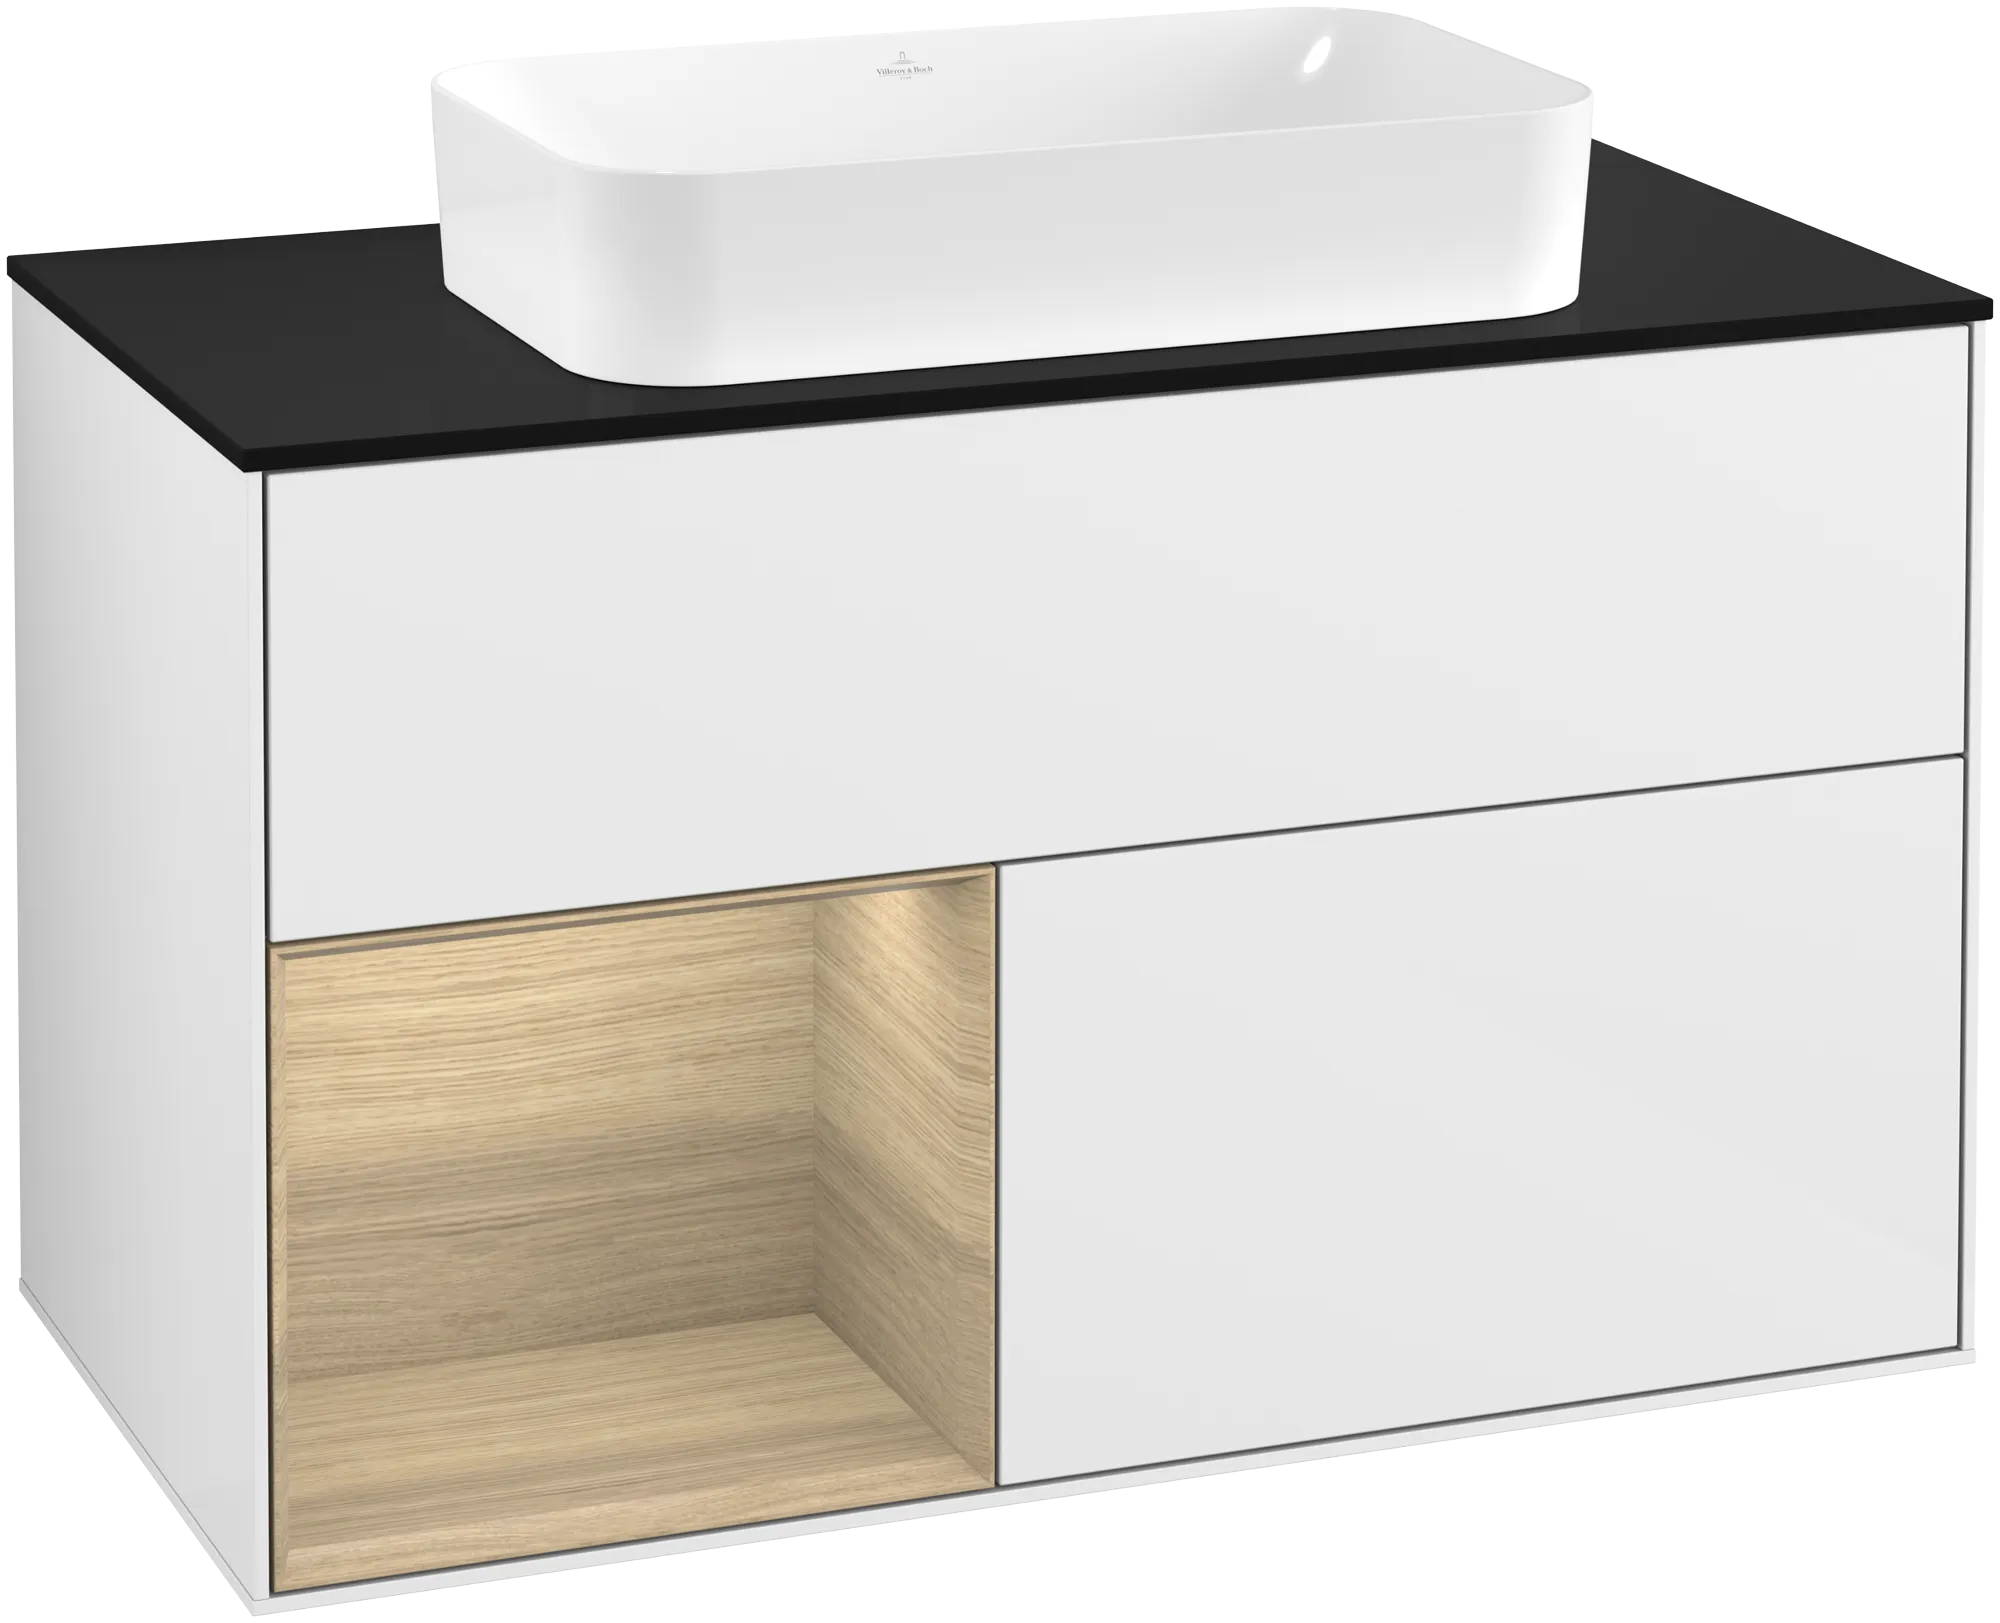 Obrázek VILLEROY BOCH Finion Vanity unit, with lighting, 2 pull-out compartments, 1000 x 603 x 501 mm, Glossy White Lacquer / Oak Veneer / Glass Black Matt #G242PCGF